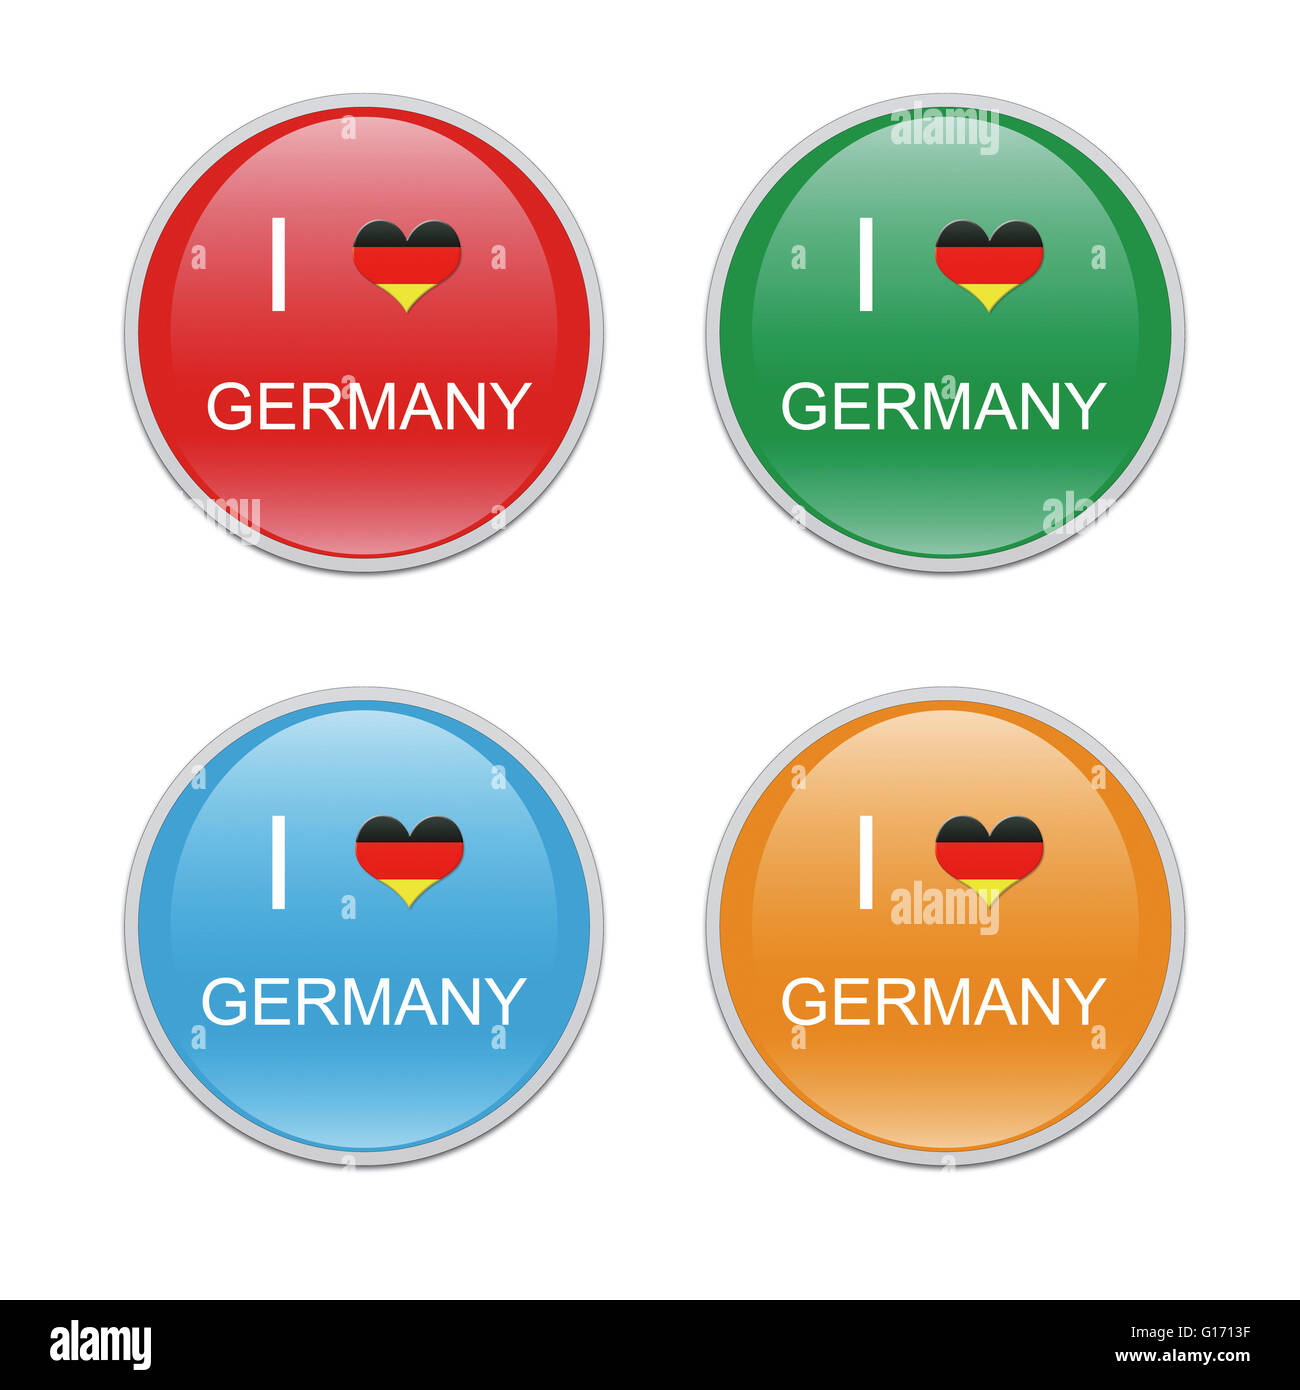 Icons to symbolize I Love Germany in red, green, blue and orange colors Stock Photo